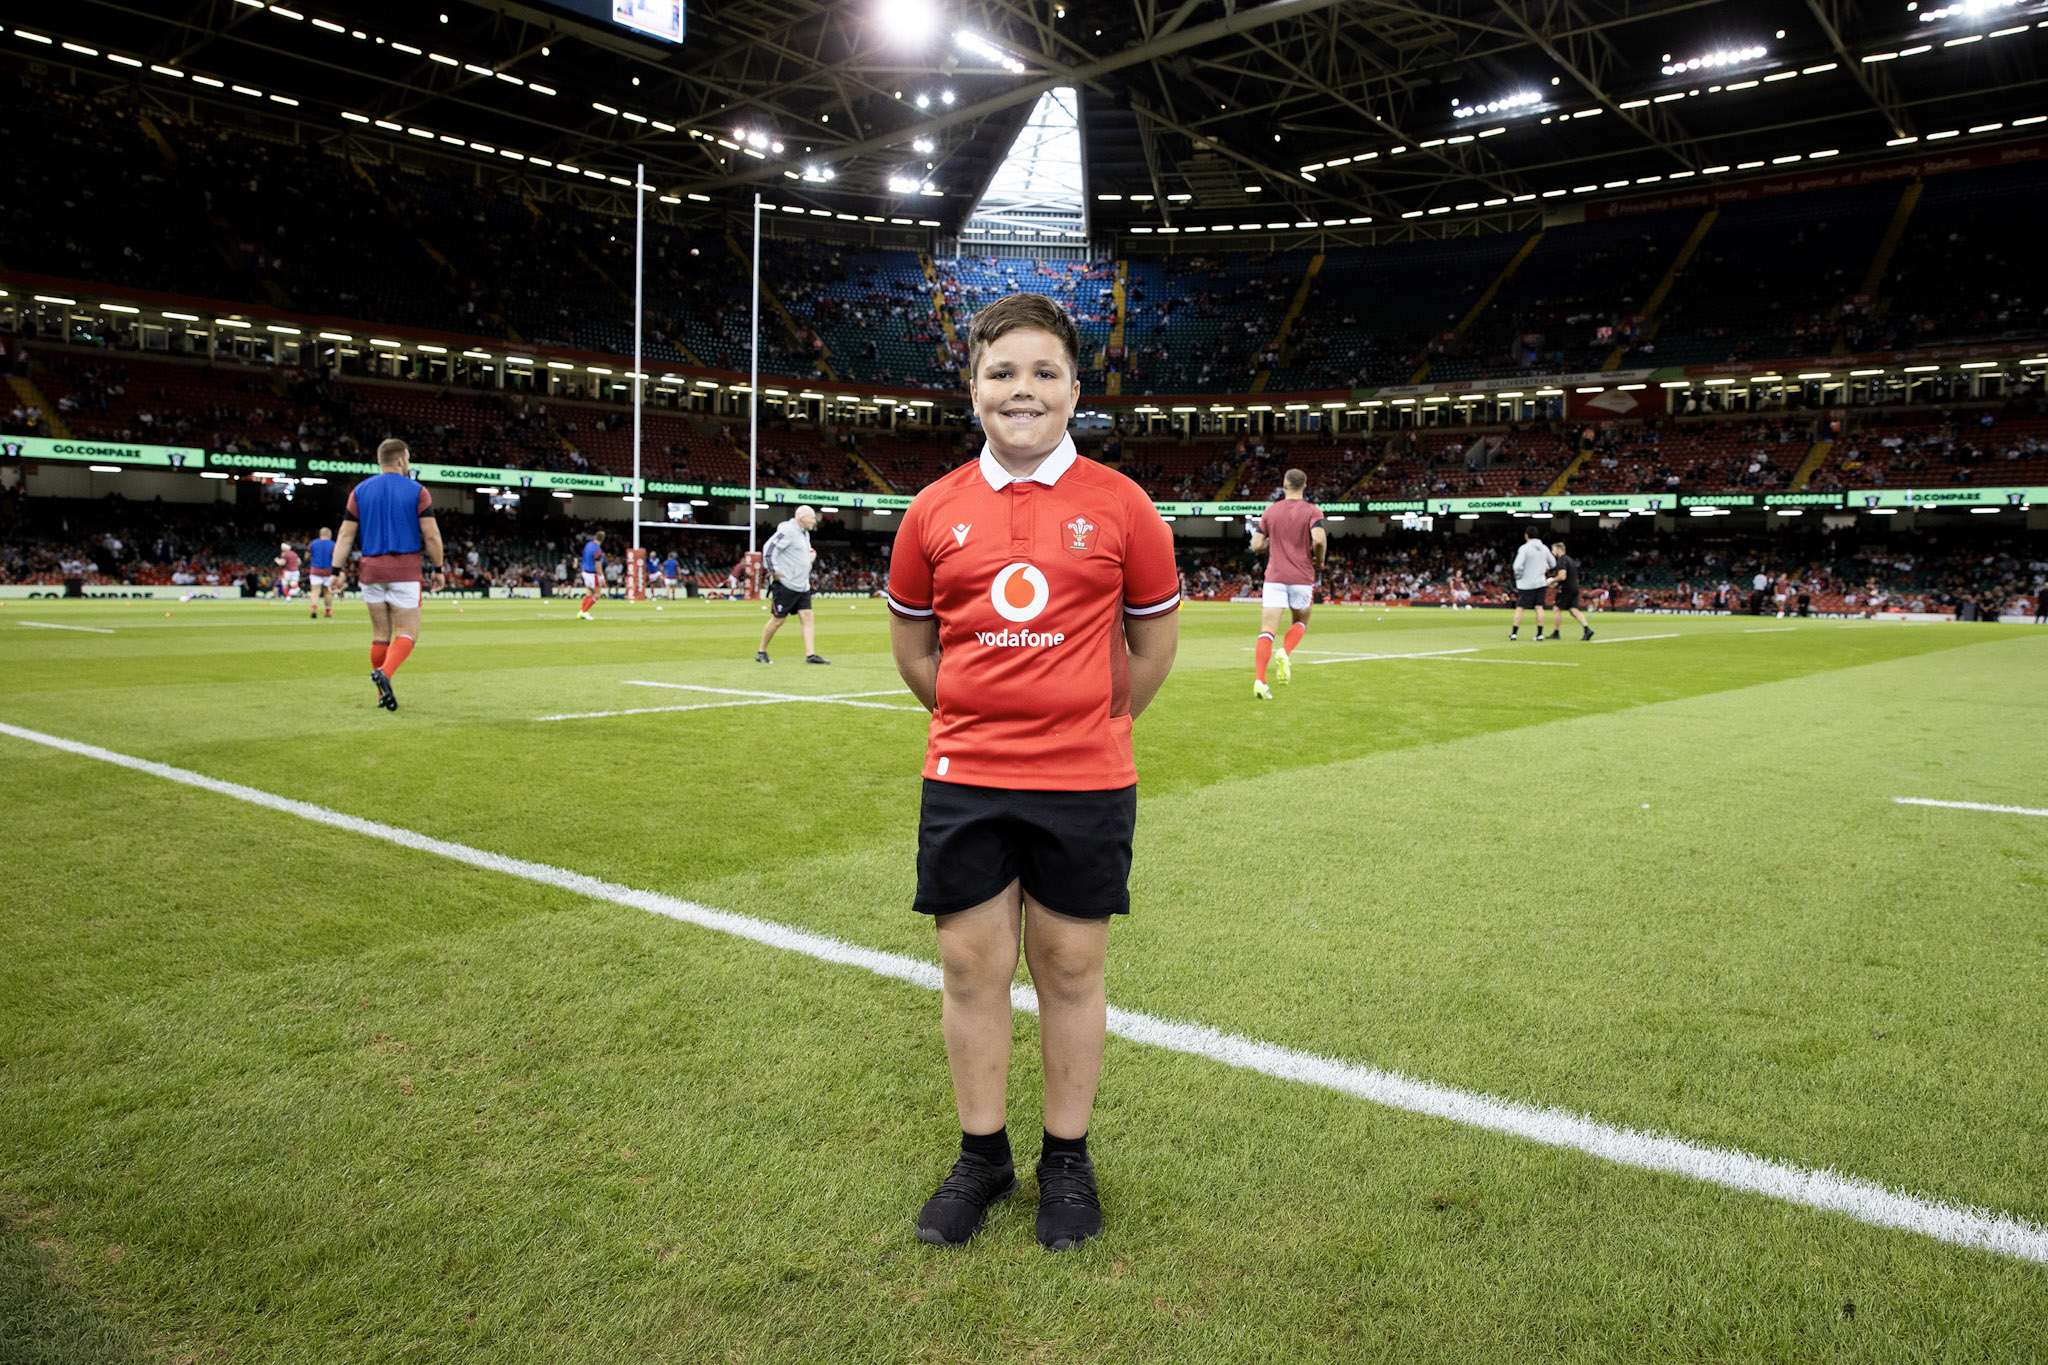 photo of grassroots rugby player Luca Gates on the pitch at the Principality Stadium